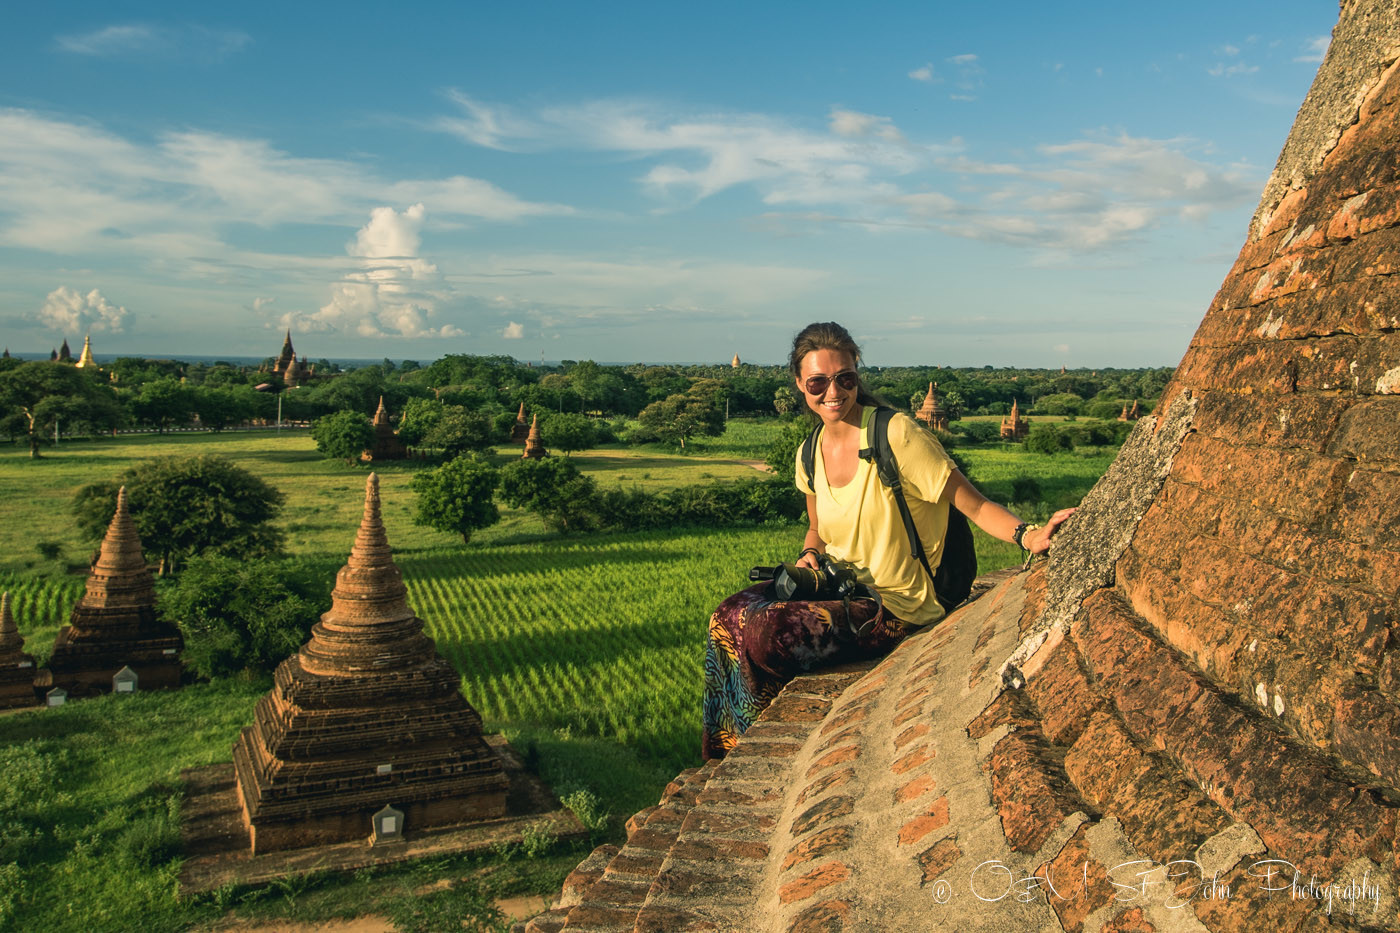 Waiting for a sunset view on top of a small pagoda in Bangan. Myanmar